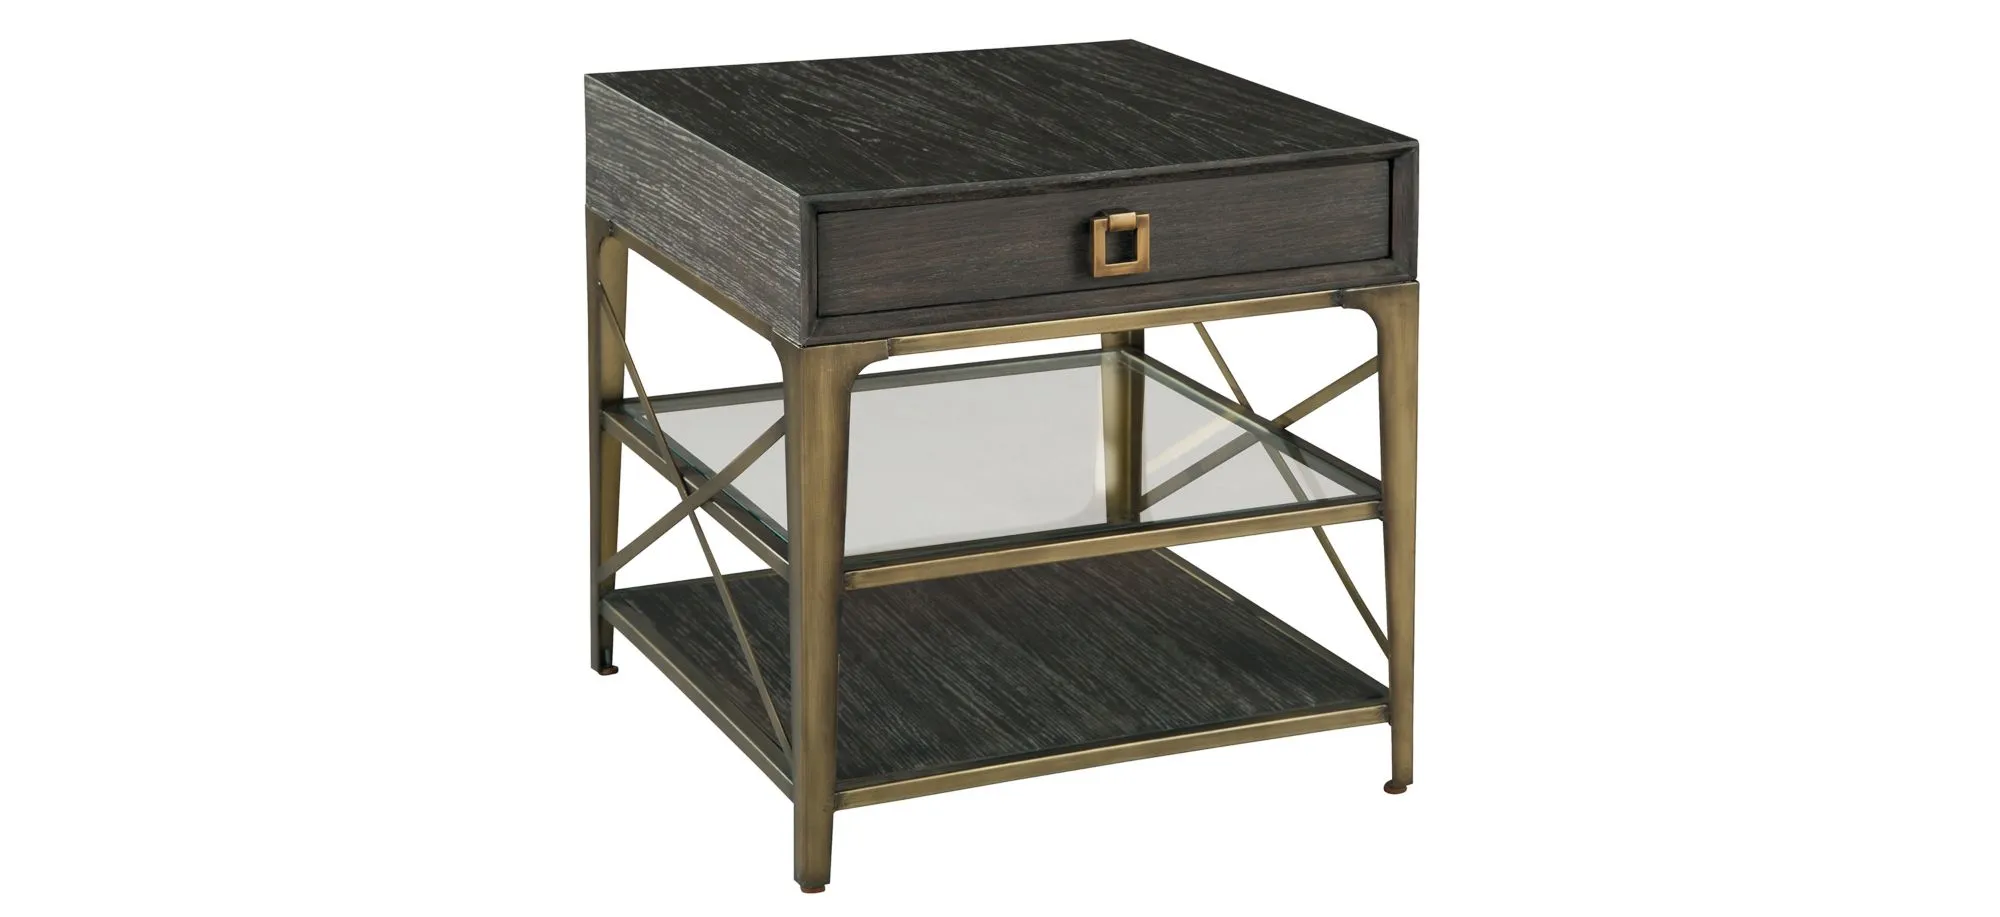 Edgewater Two Tier Side Table in EDGEWATER by Hekman Furniture Company